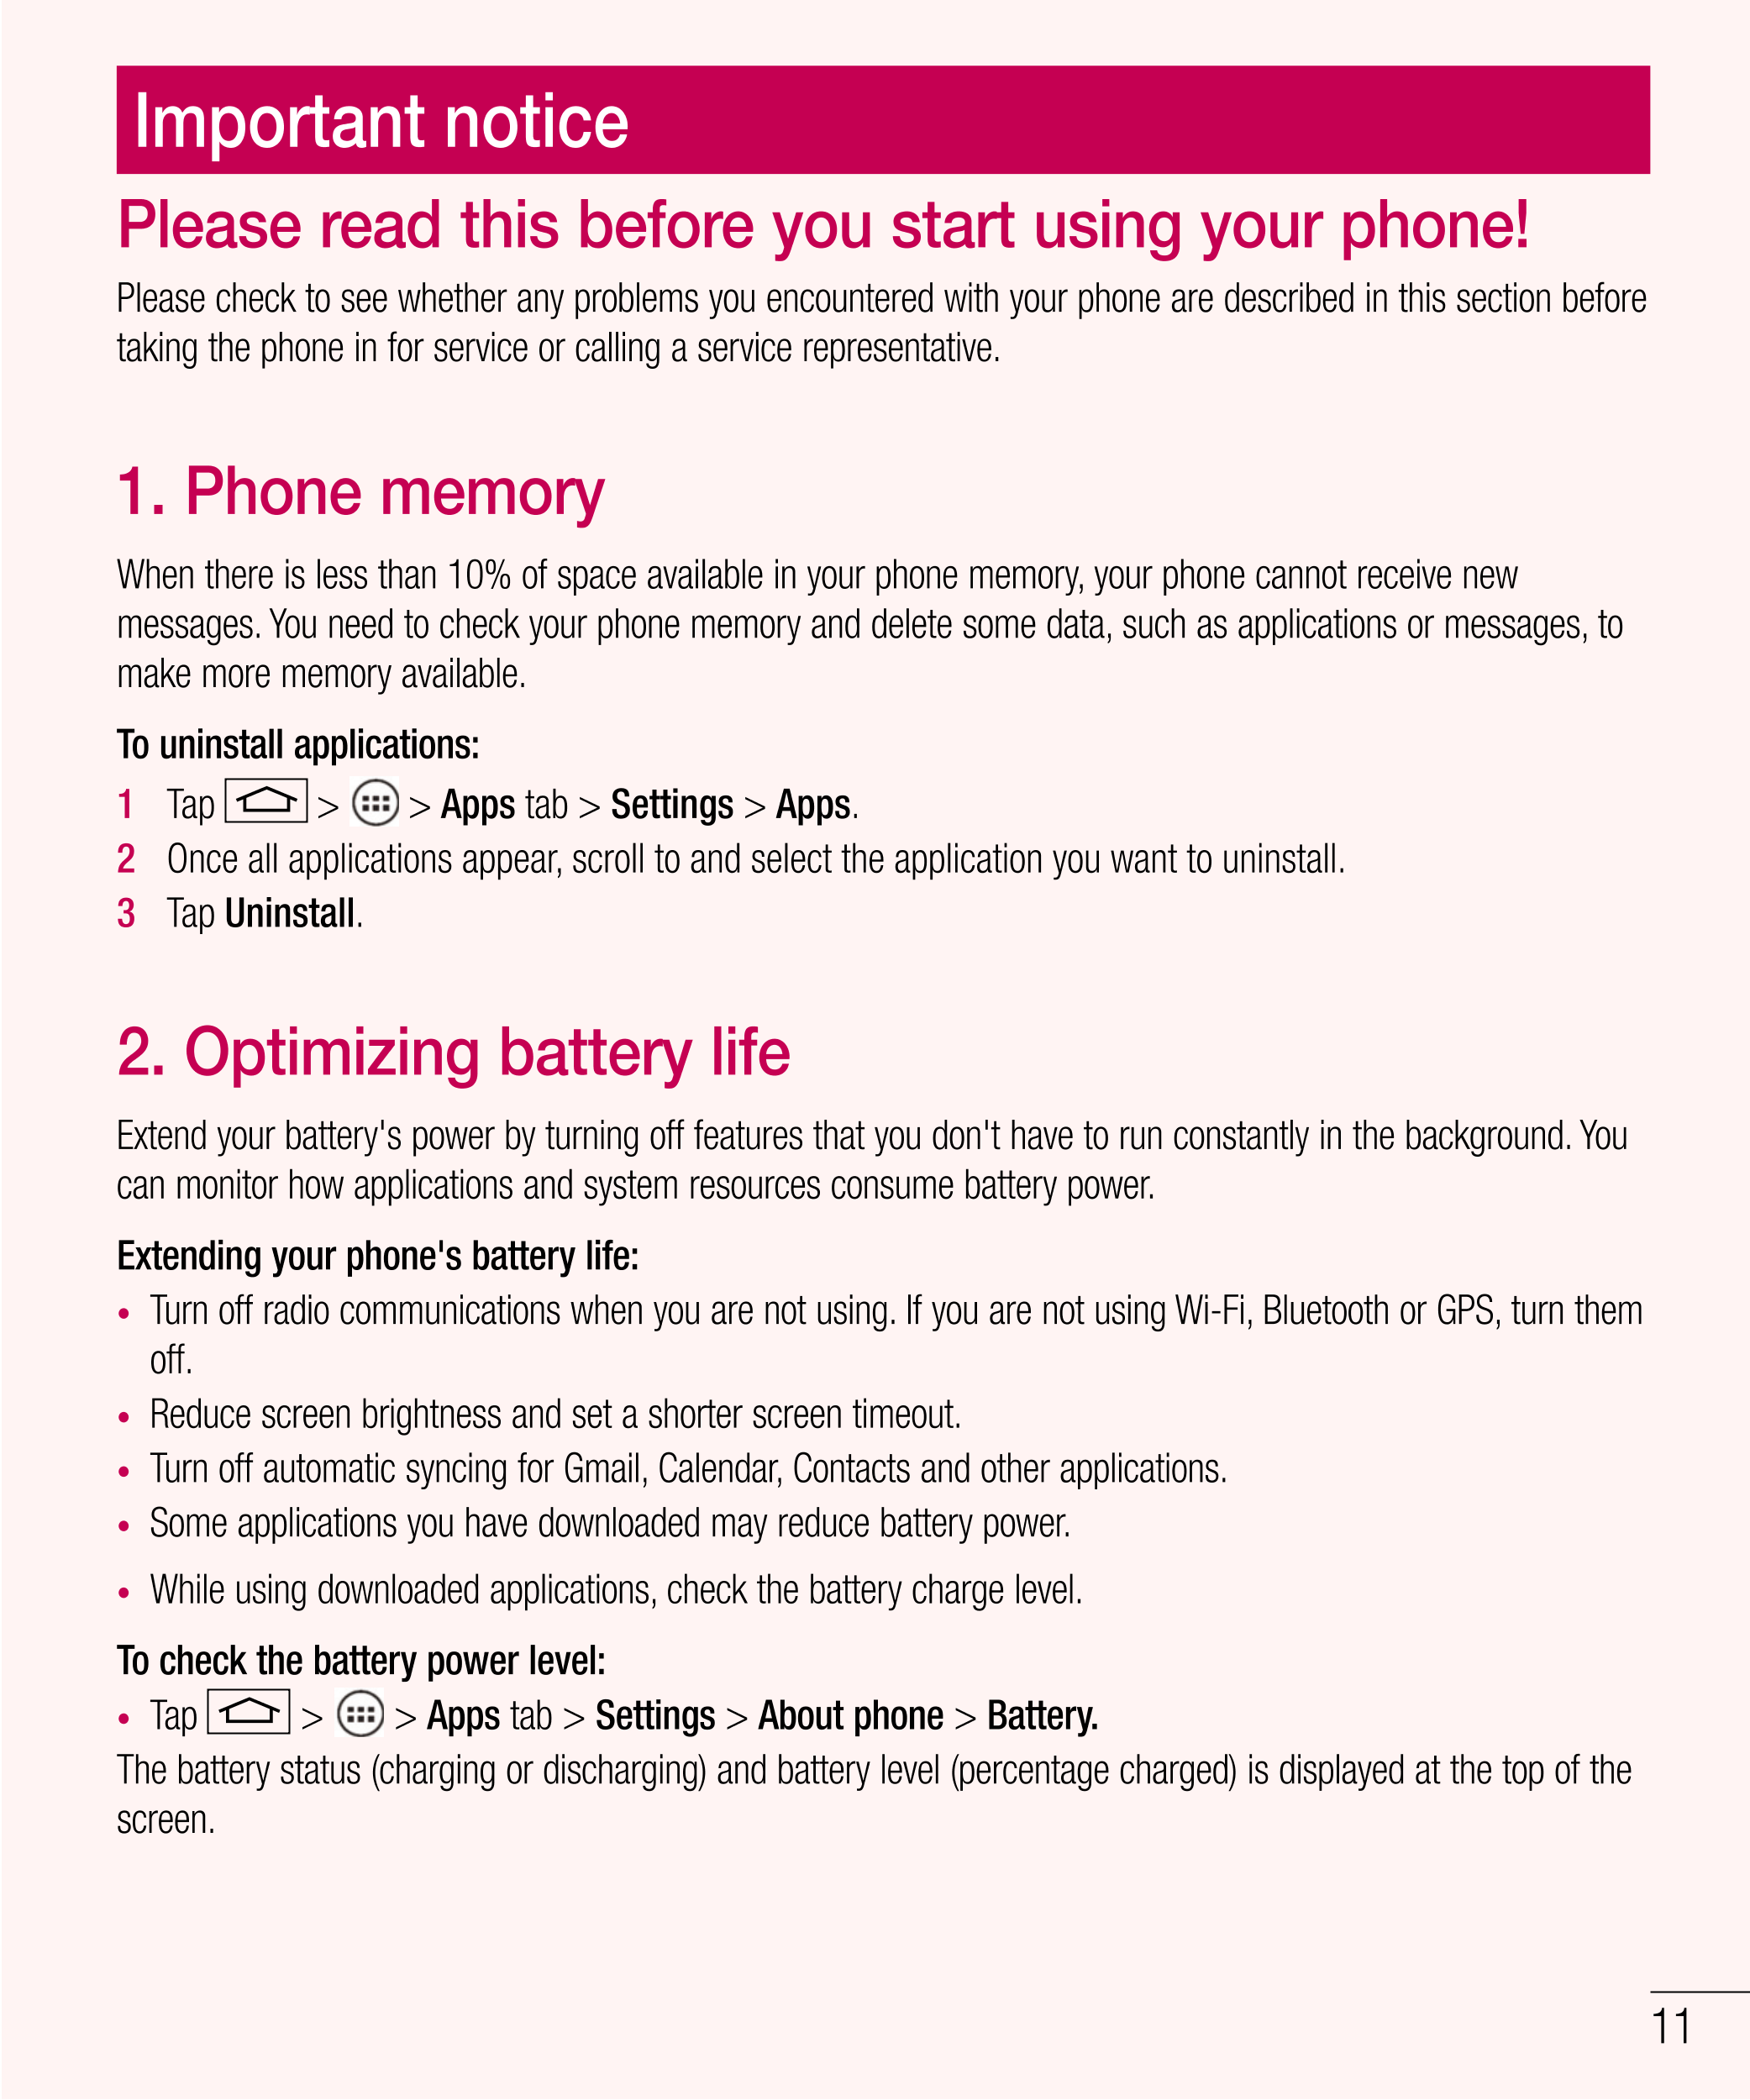 Important notice
Please read this before you start using your phone!
Please check to see whether any problems you encountered wi